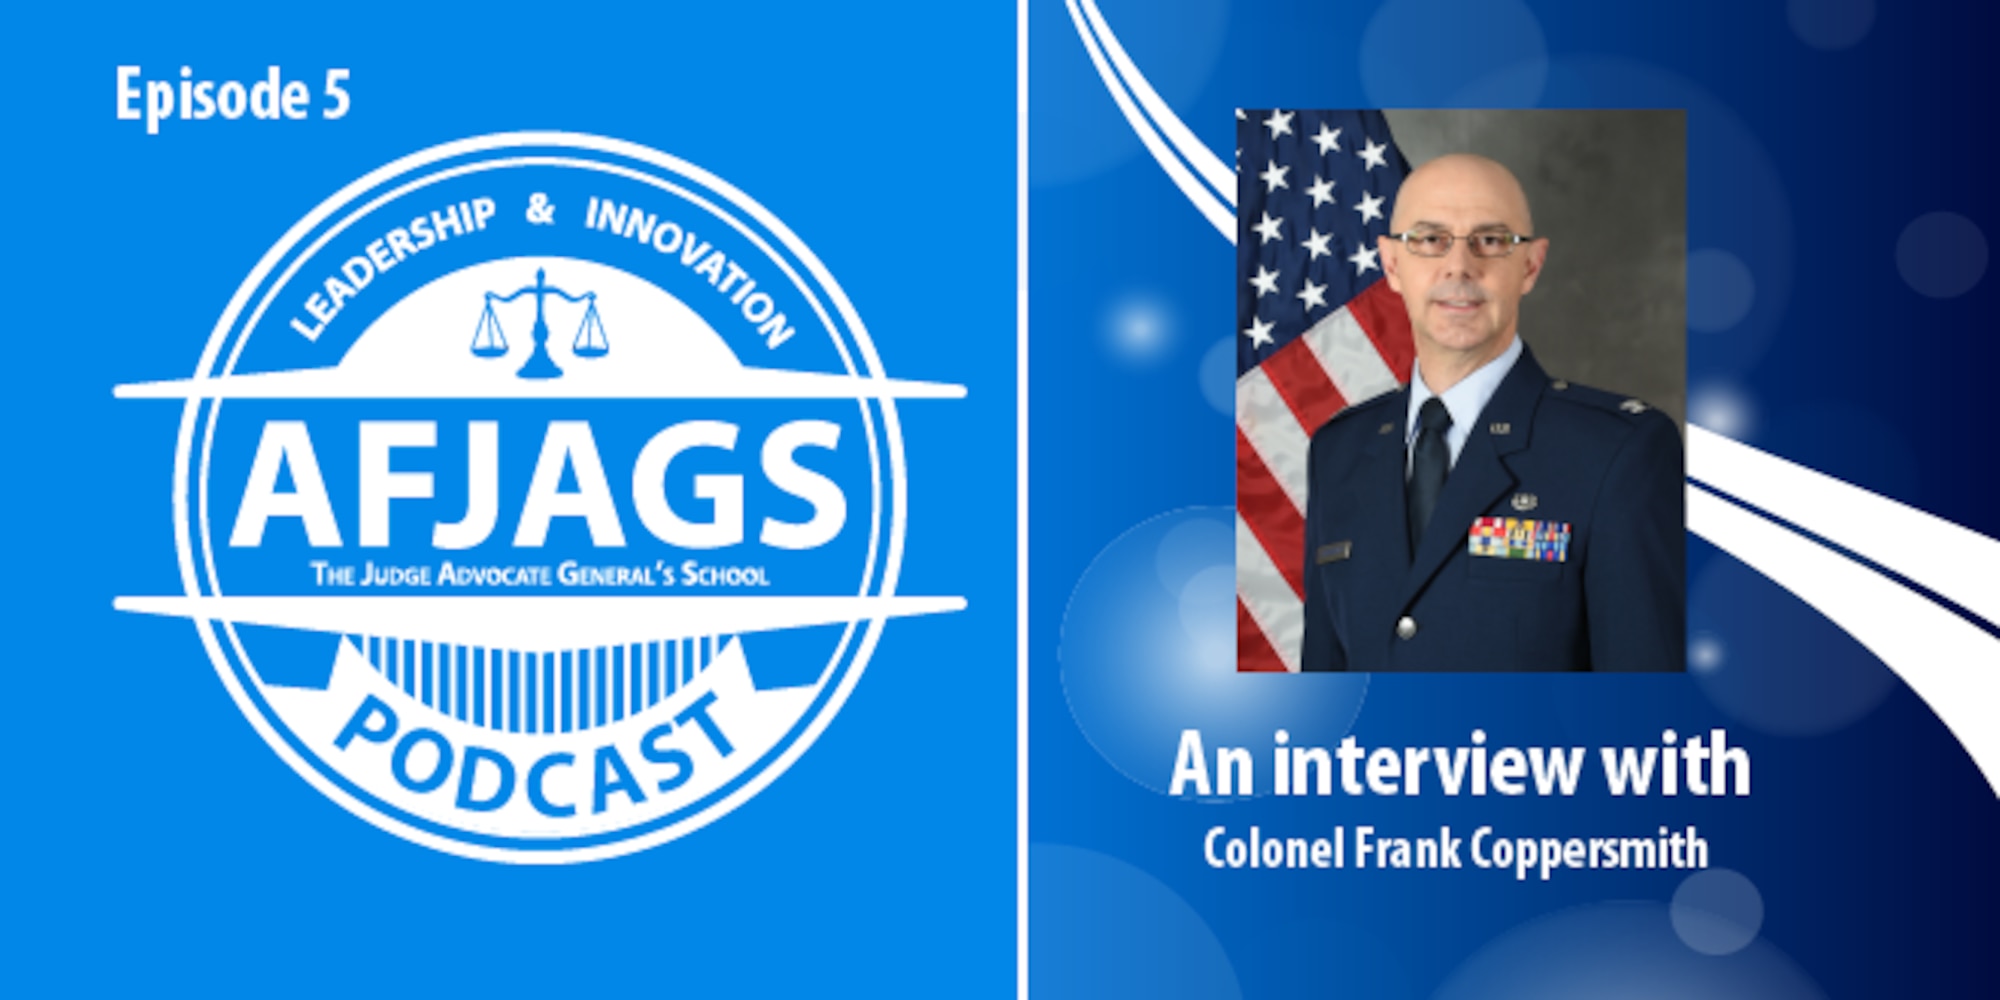 AFJAGS Podcast Episode 5, an interview with Colonel Frank Coppersmith – Part 2